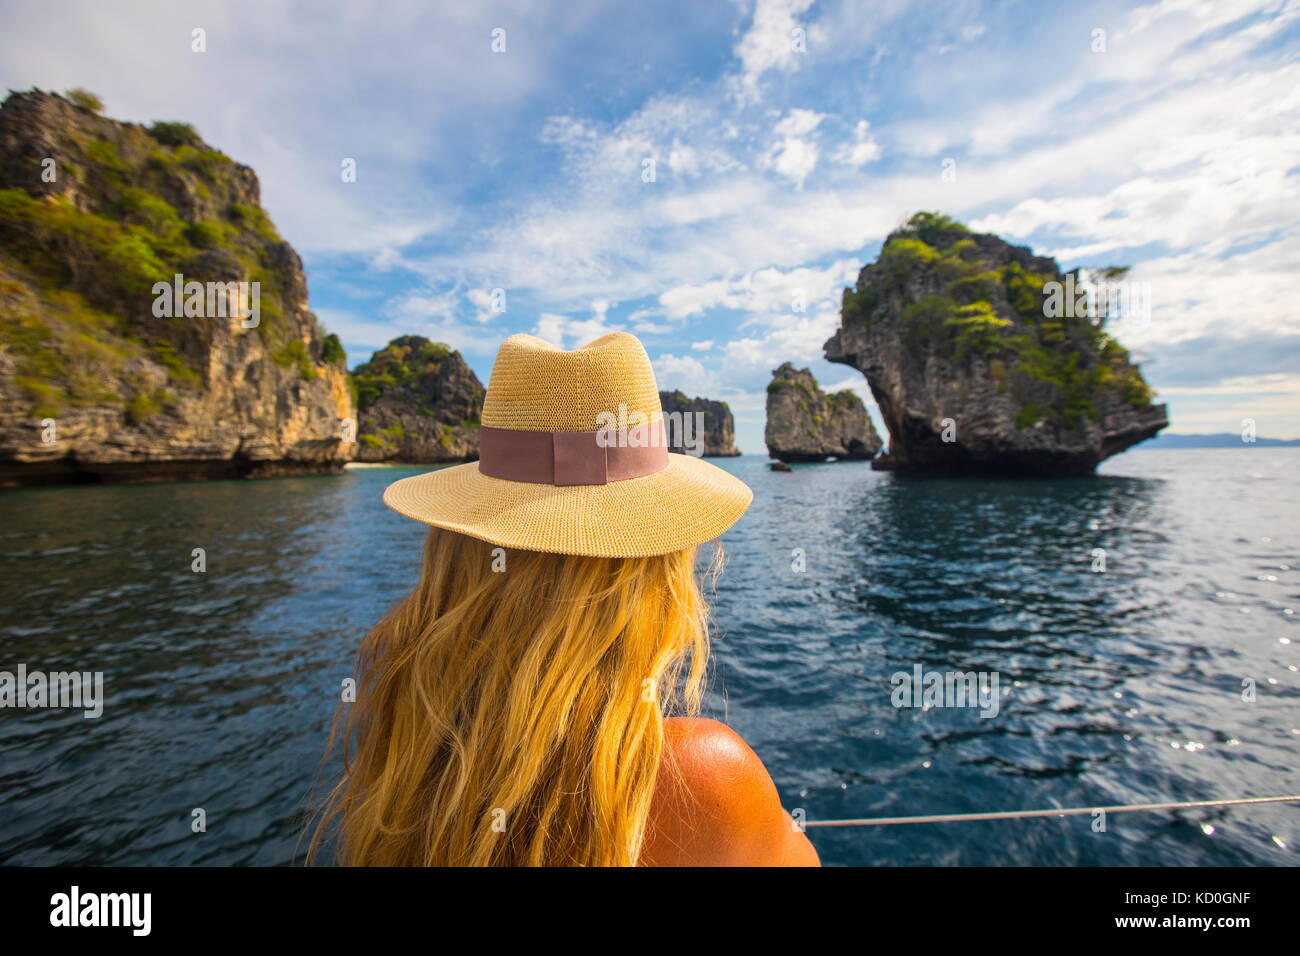 Rear view of woman looking away at view, Koh Li Ma, Thailand, Asia Stock Photo